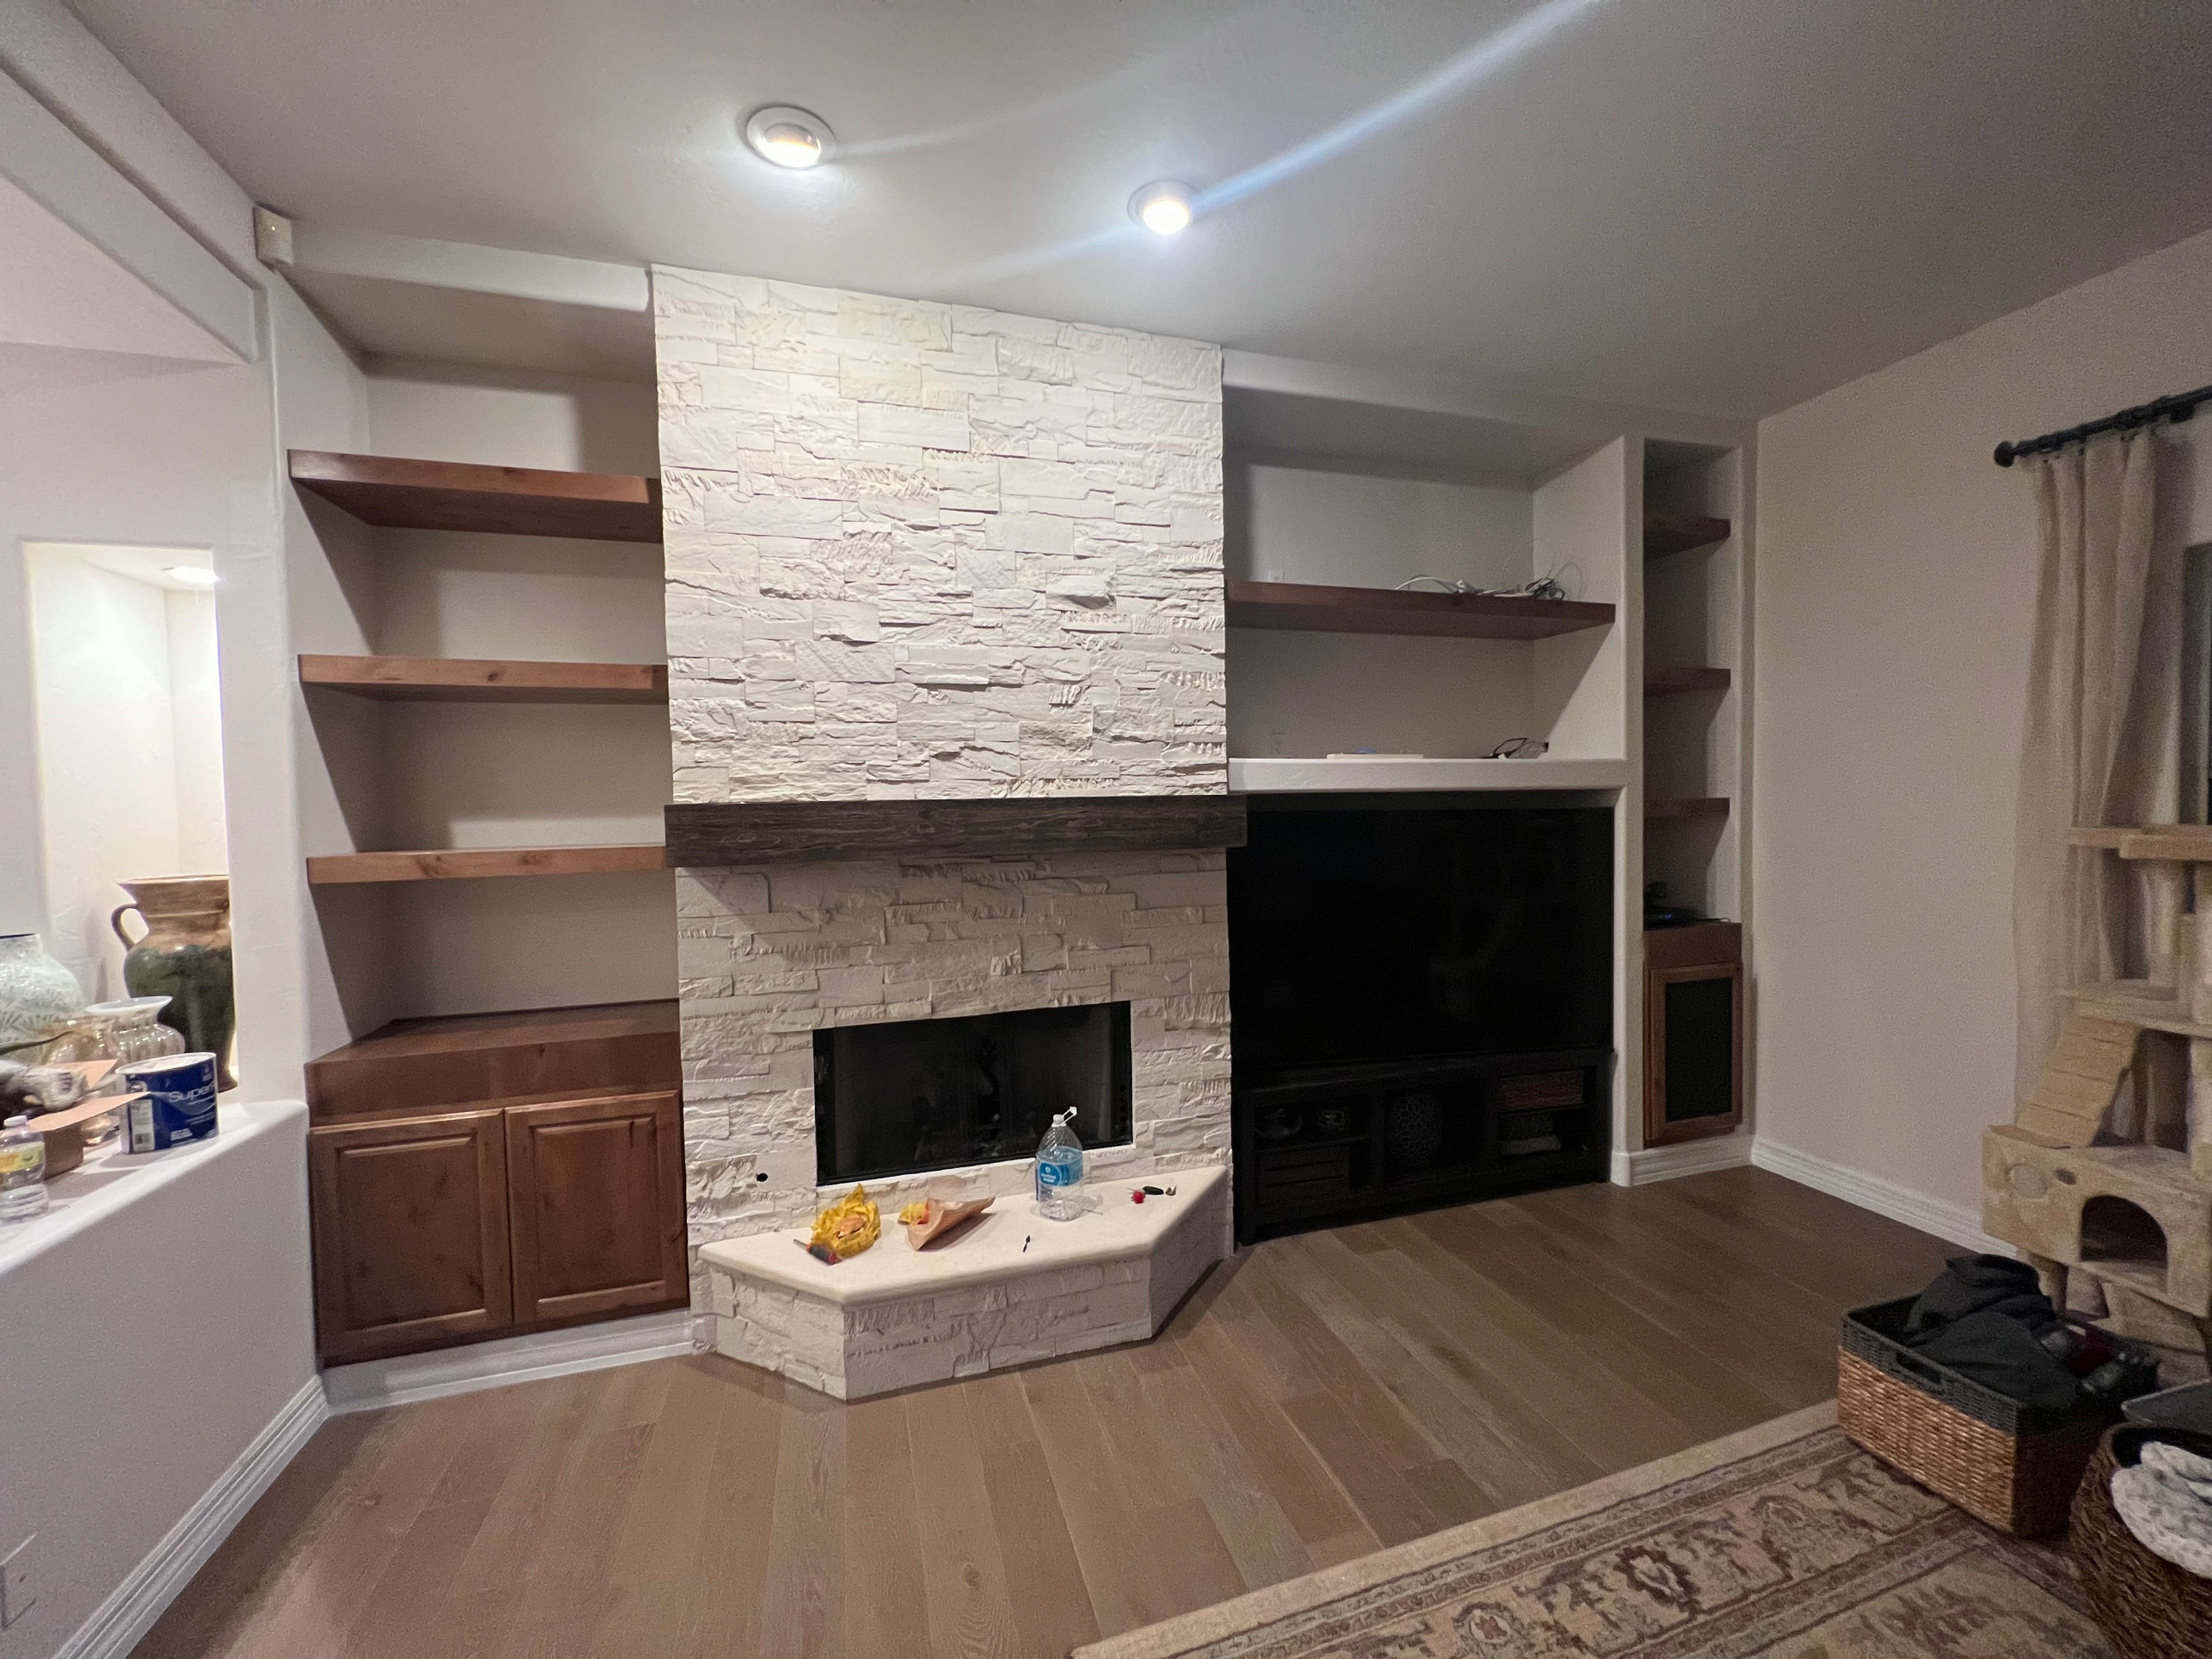 Custom Stained Cabinetry, Shelves, and Built In's